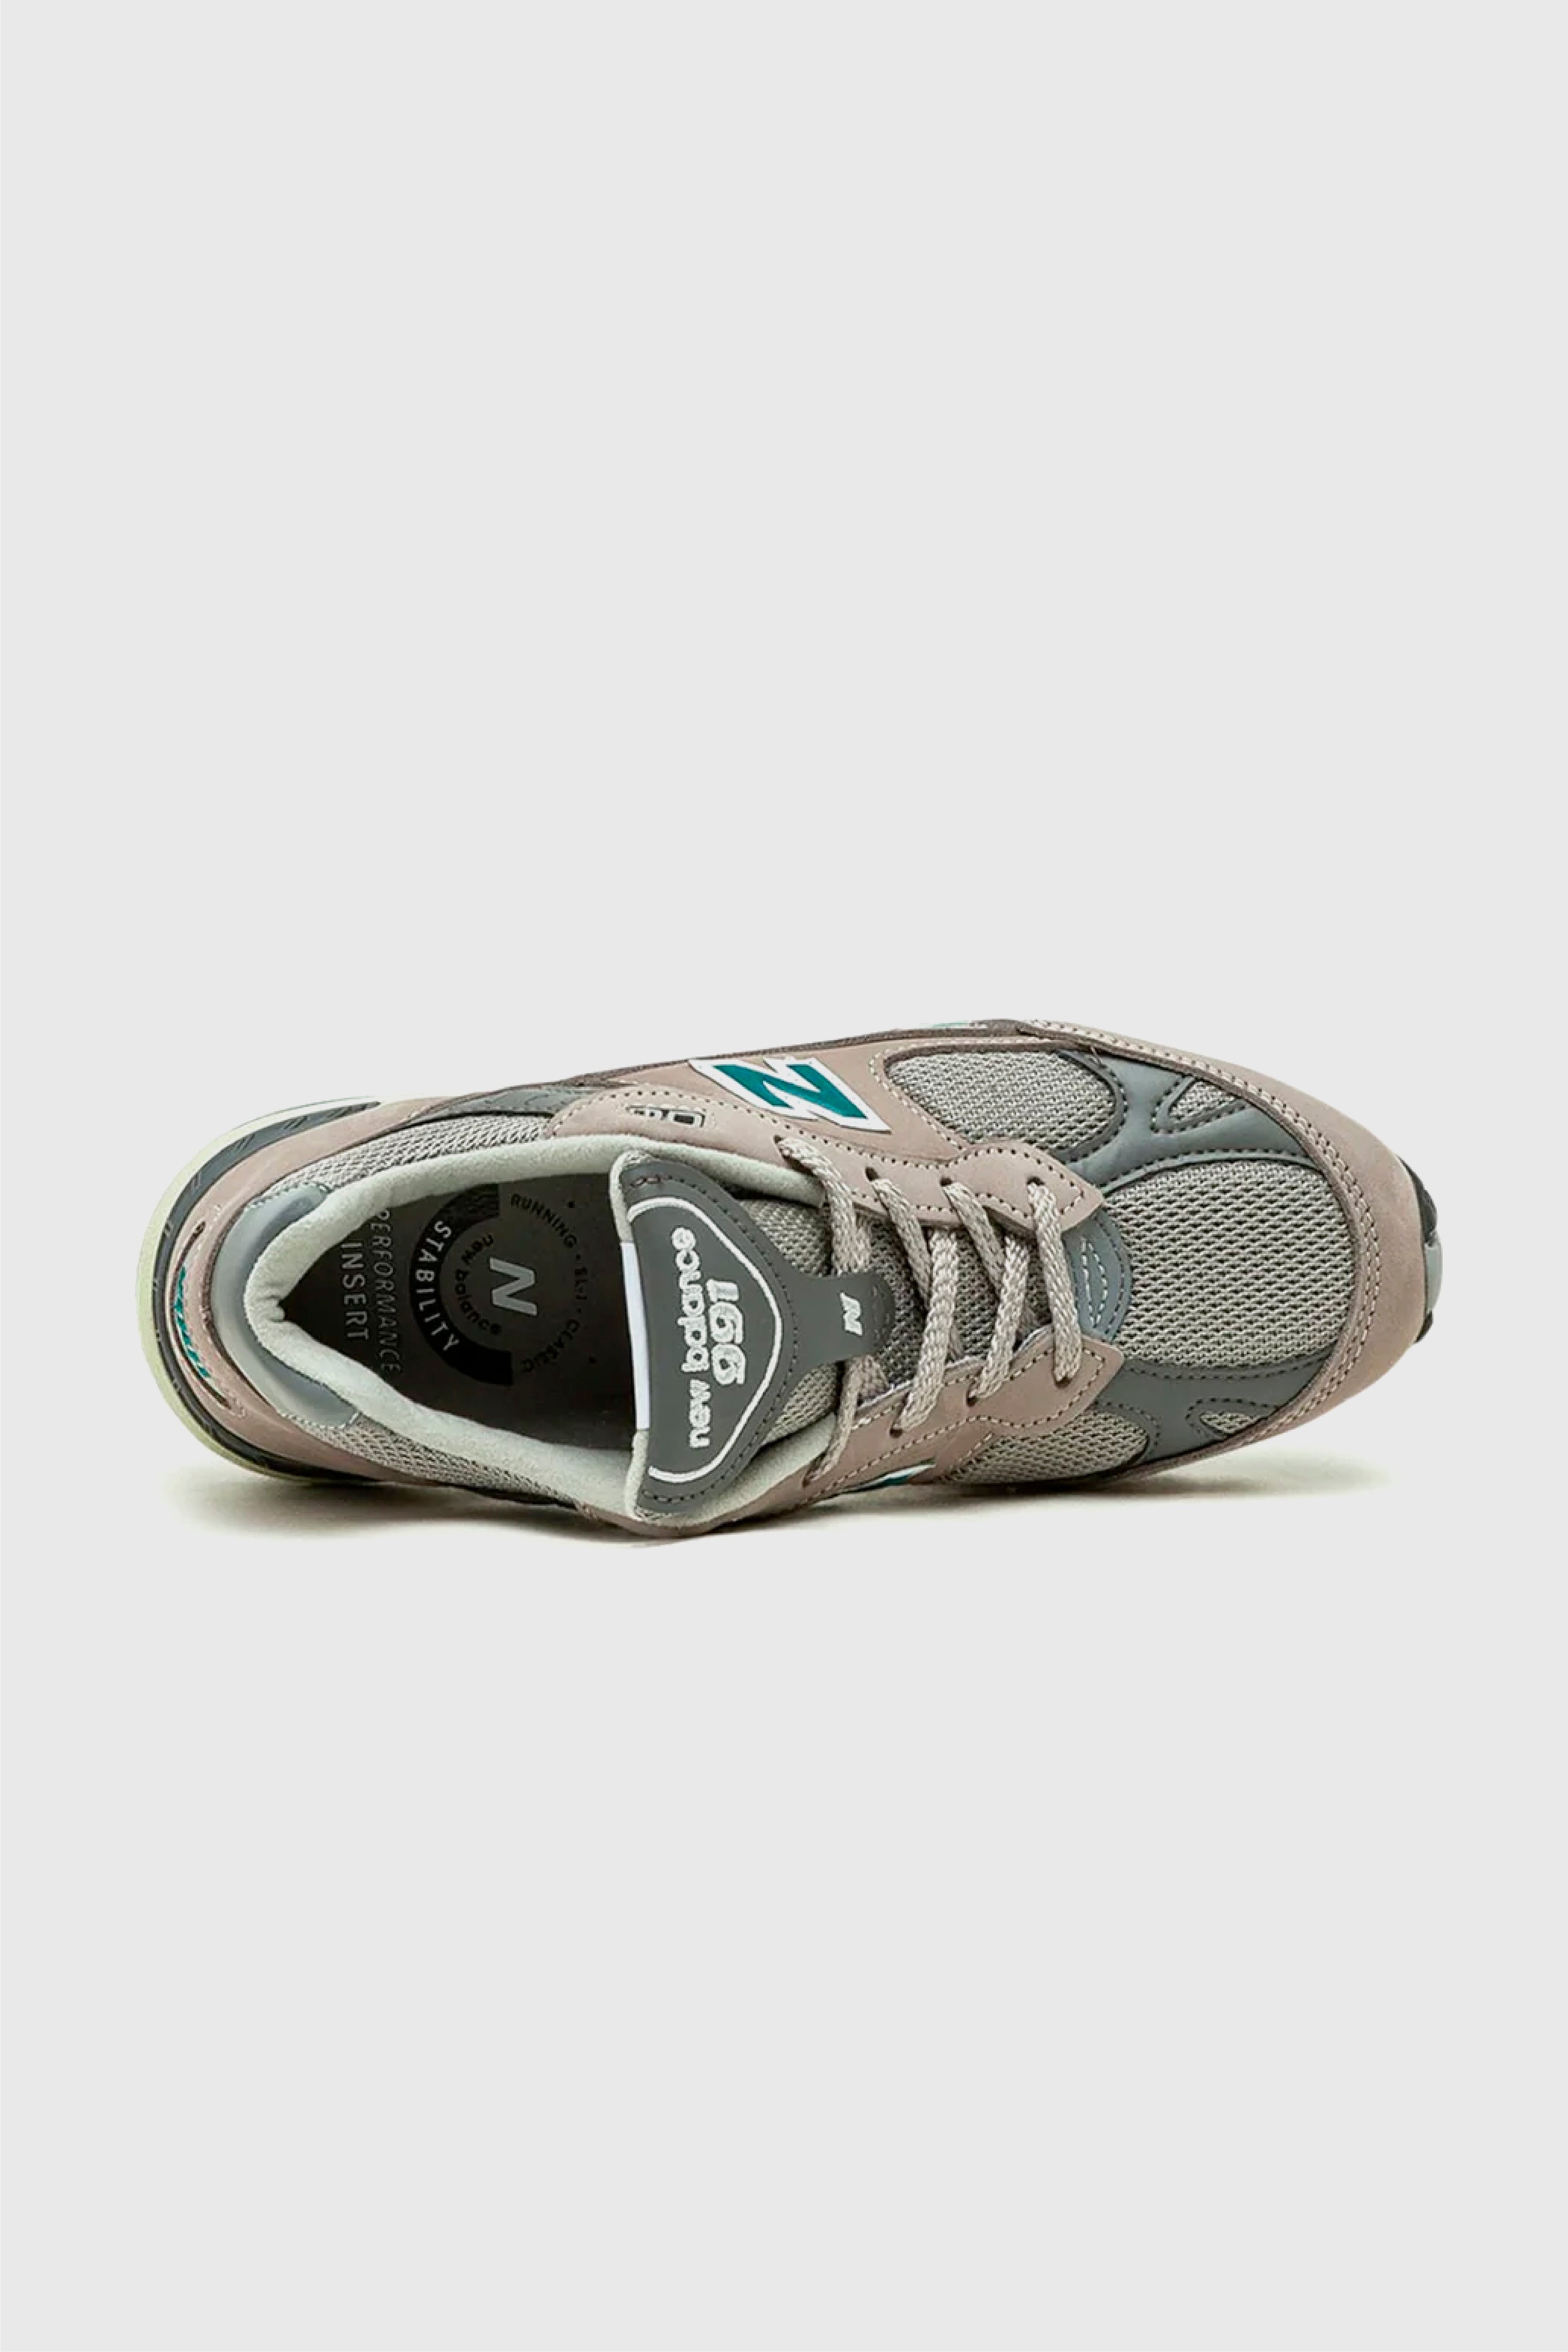 Selectshop FRAME - NEW BALANCE 991 Made in England "Green And Grey" Footwear Concept Store Dubai